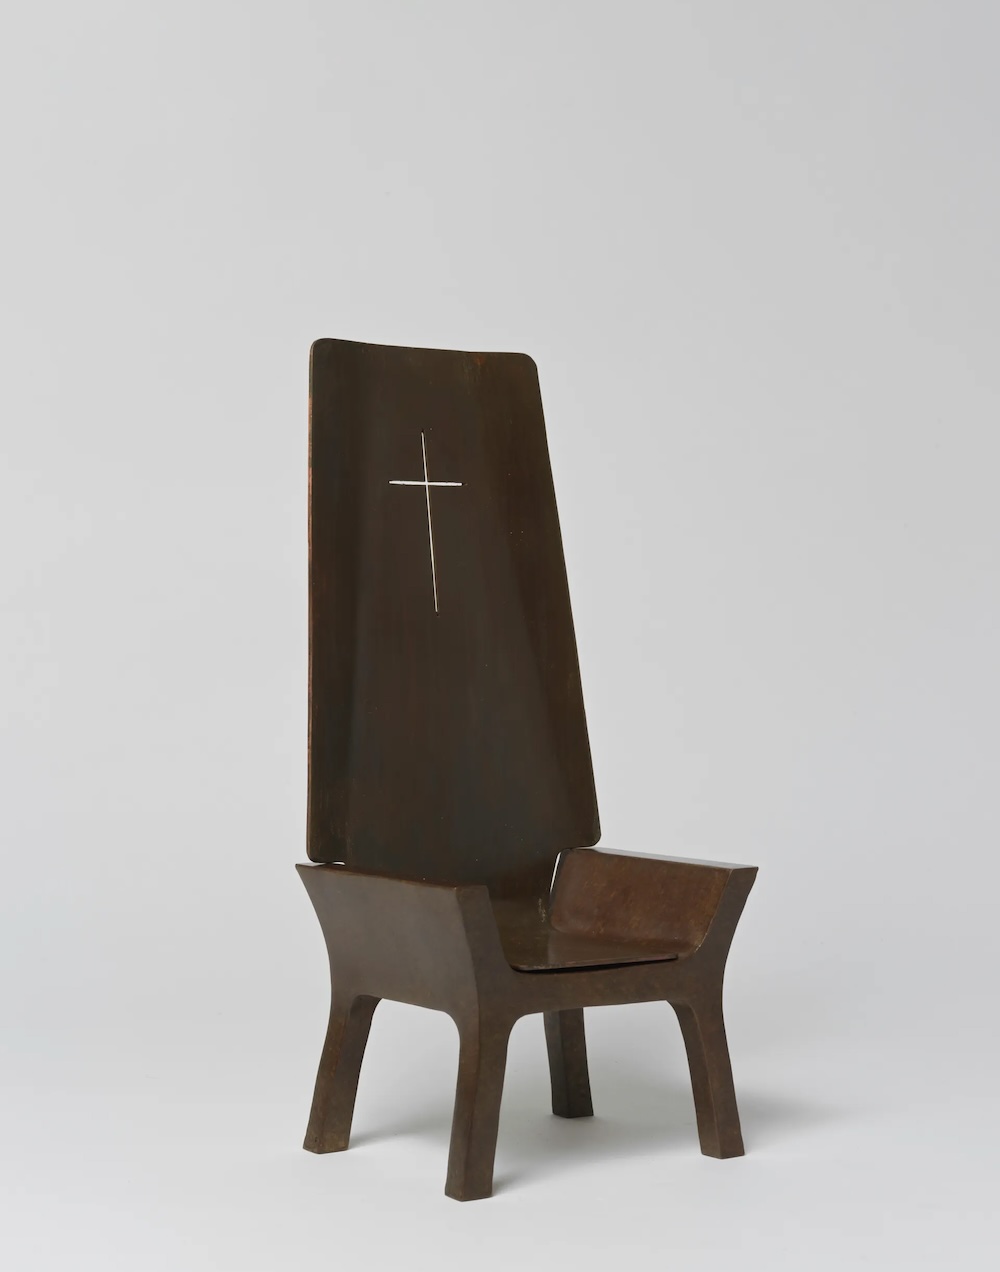 cathedra by guillaume bardet